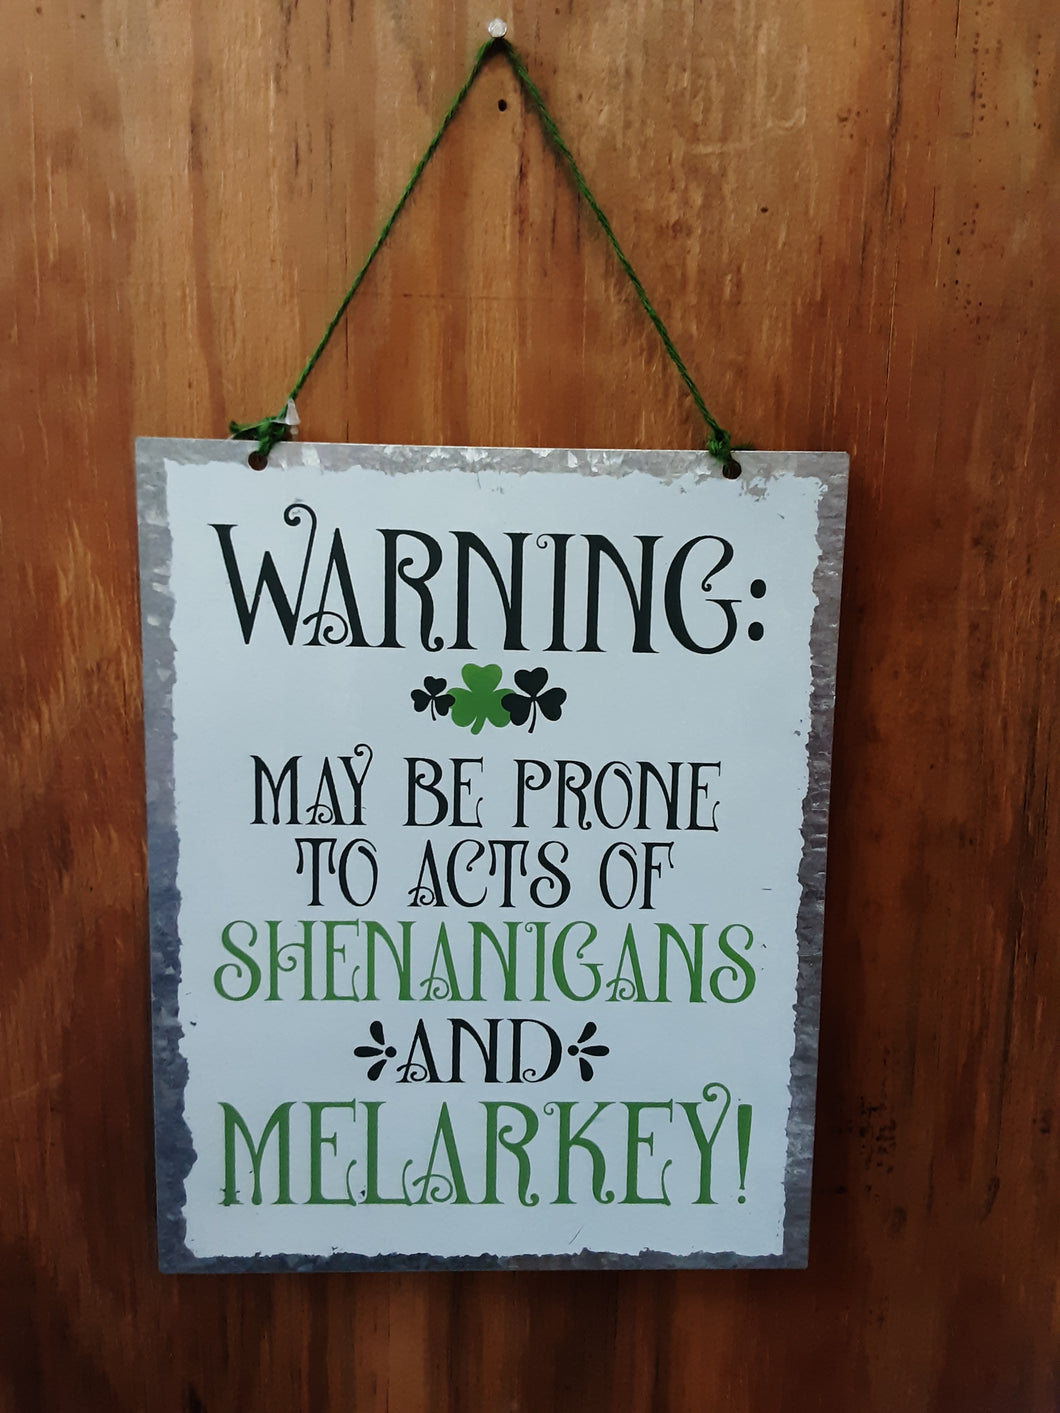 Warning:   May be prone to acts of shenanigans and melarkey!